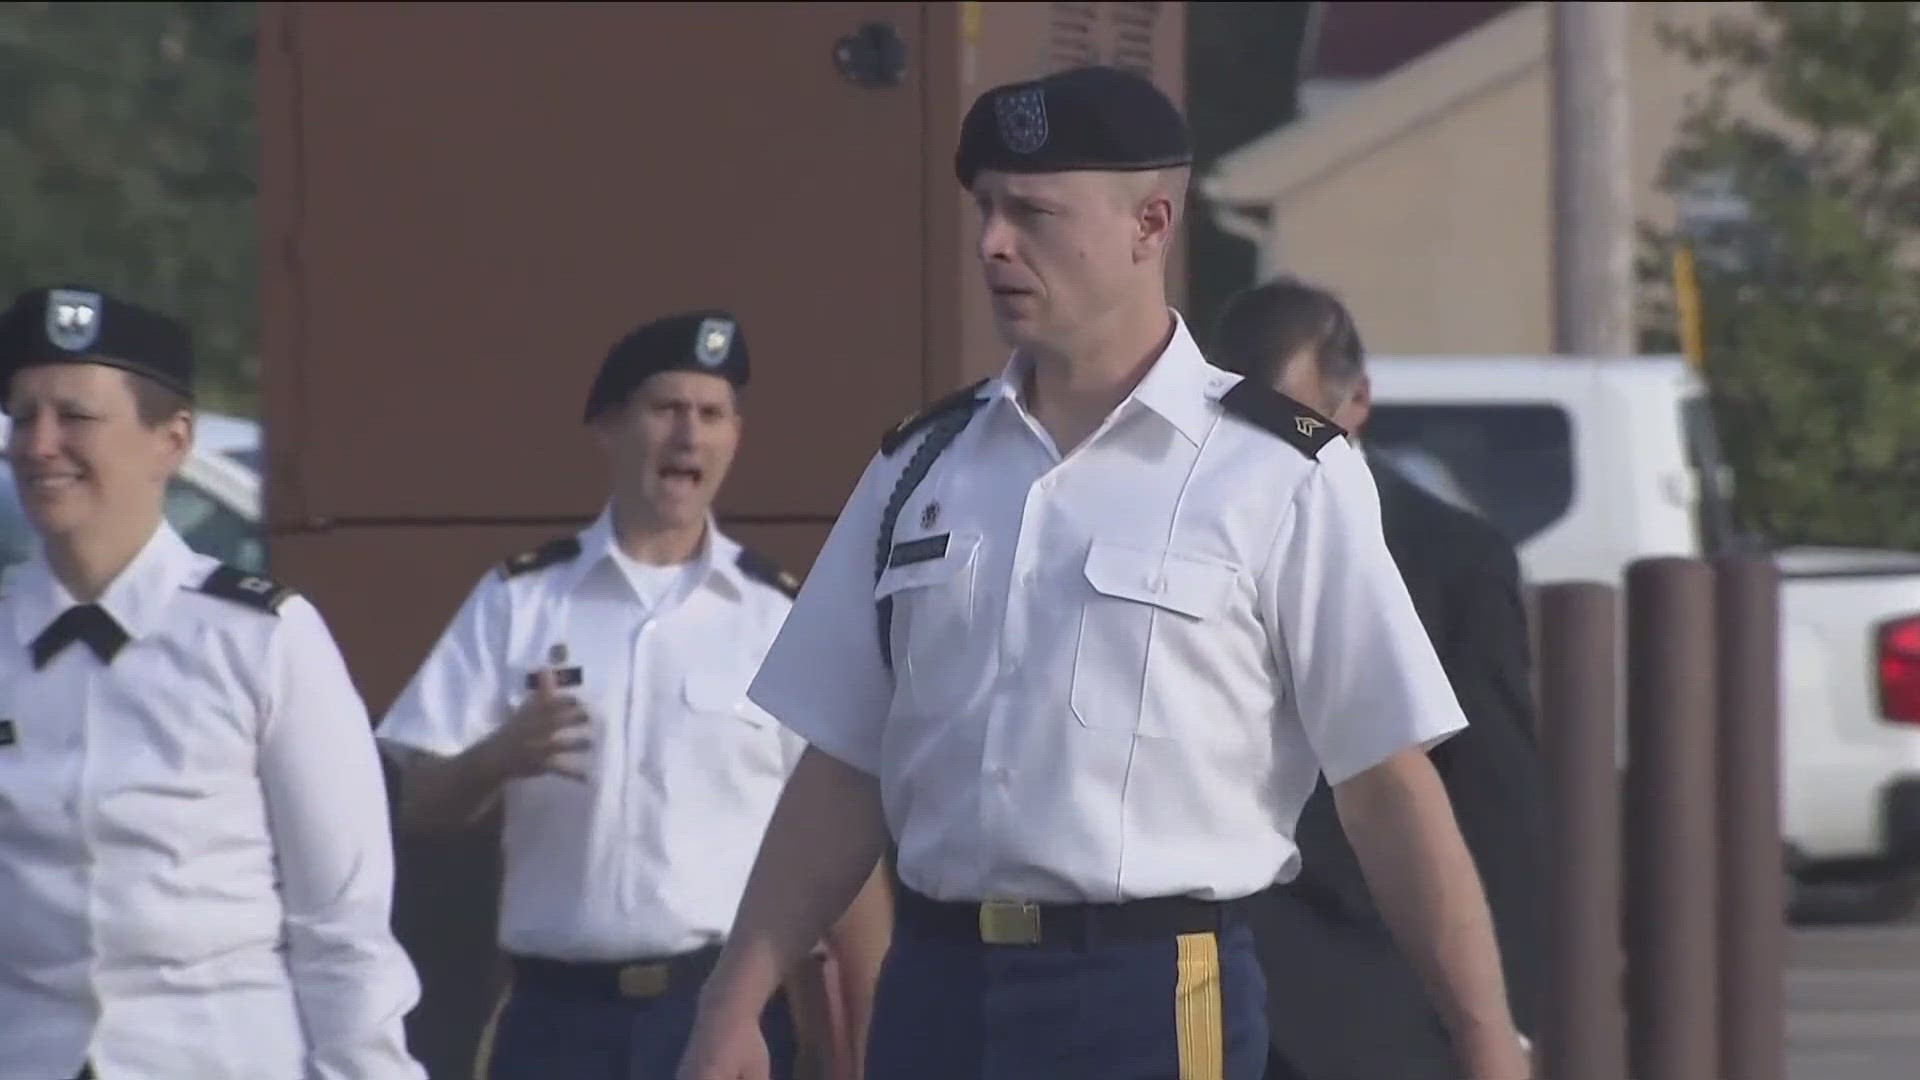 Bowe Bergdahl was charged with desertion and misbehavior before the enemy after the then-23-year-old left his post in Afghanistan in 2009.